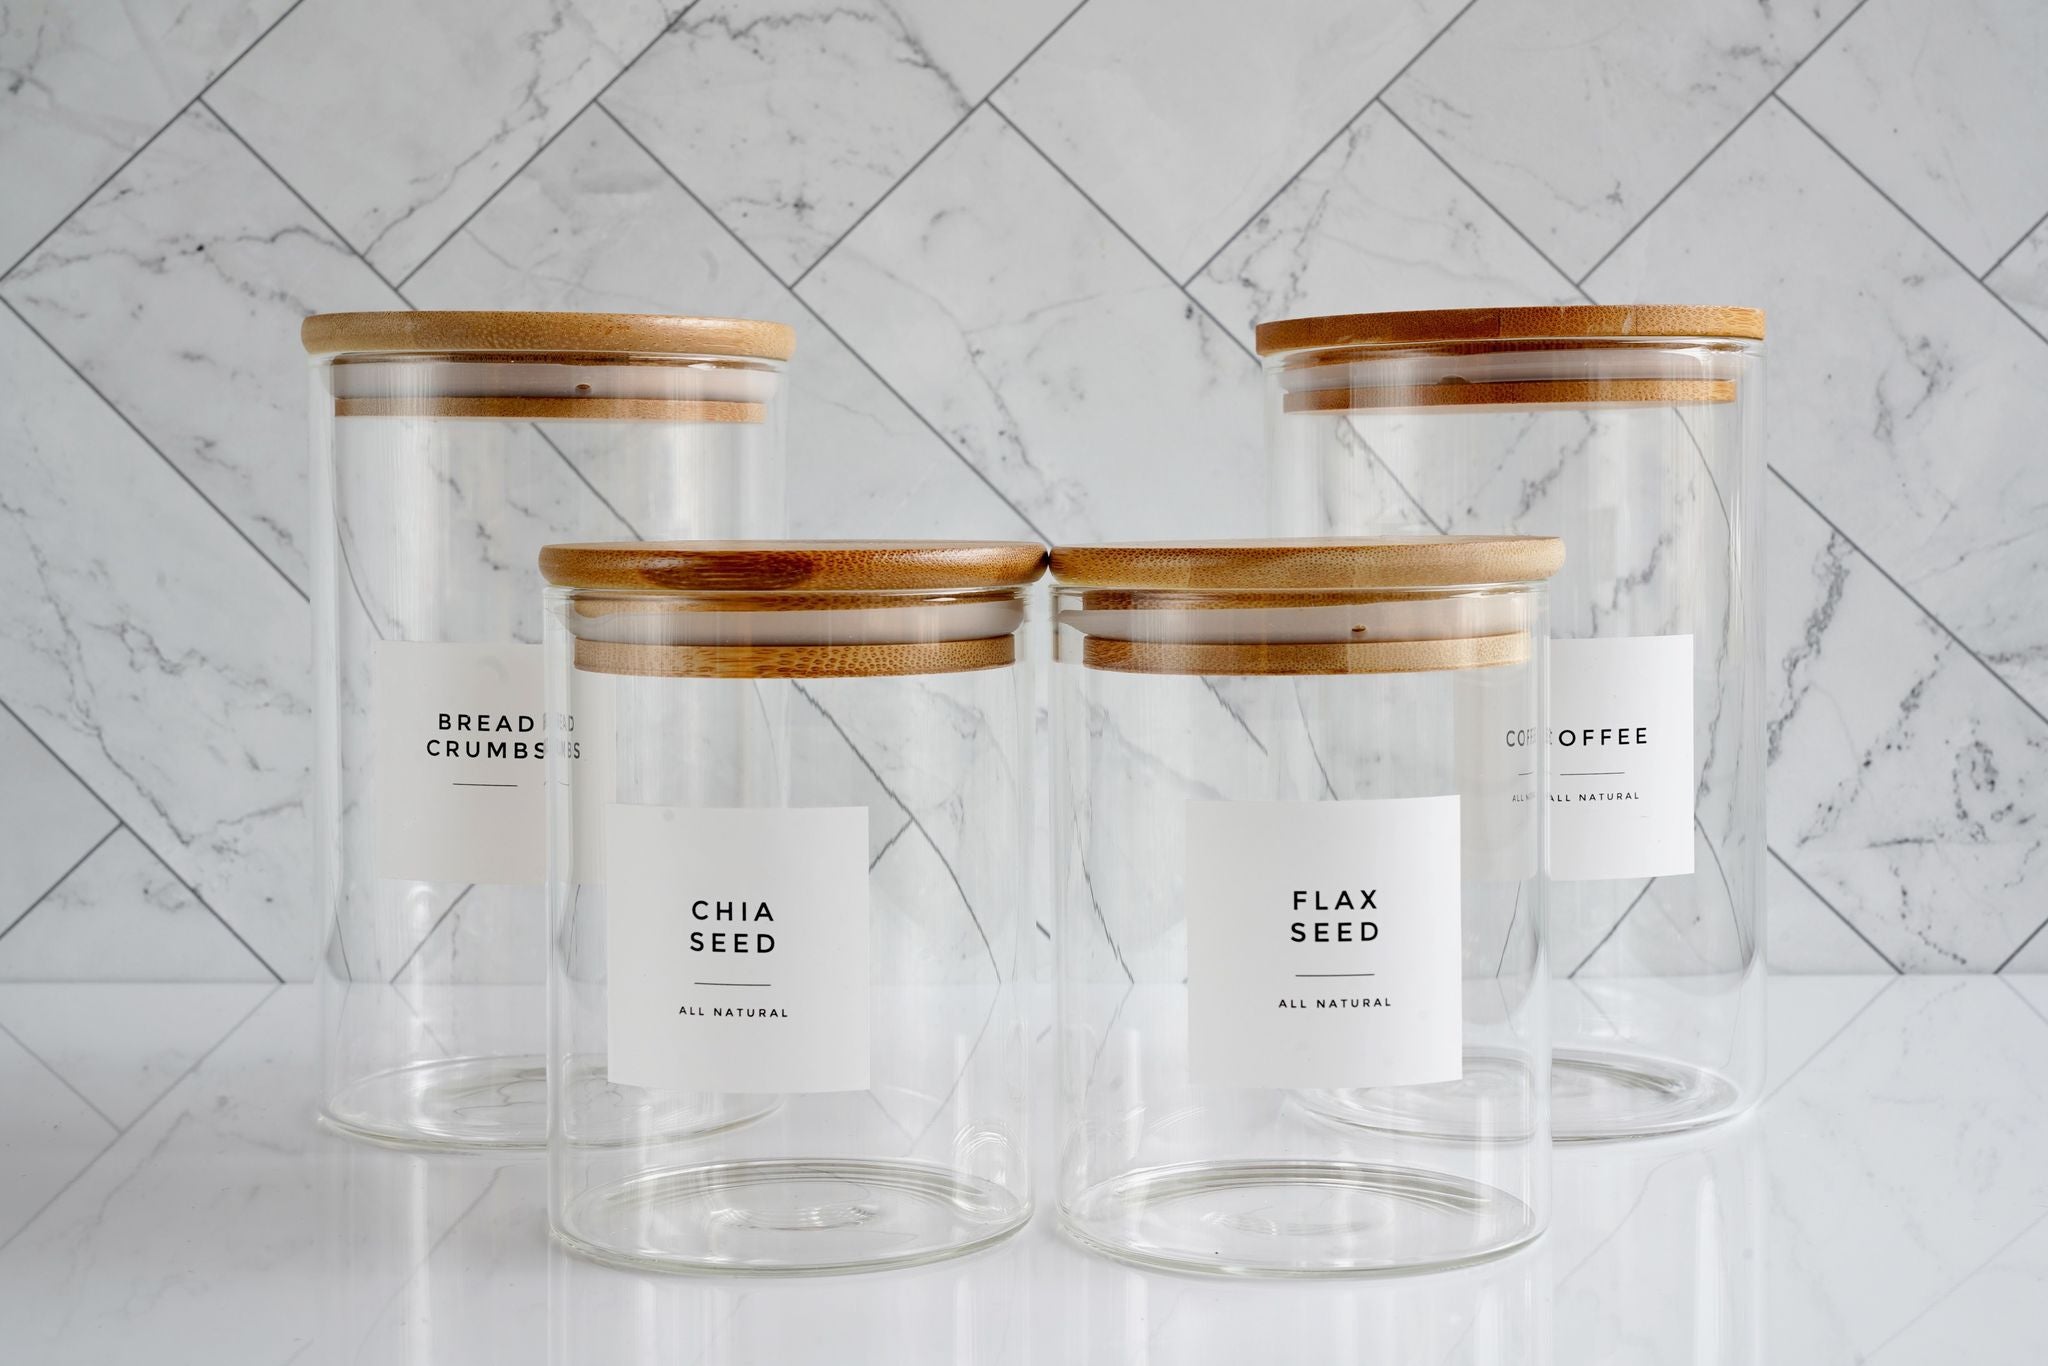 Modern Glass Jar with a Black Metal Lid – Spice It Your Way